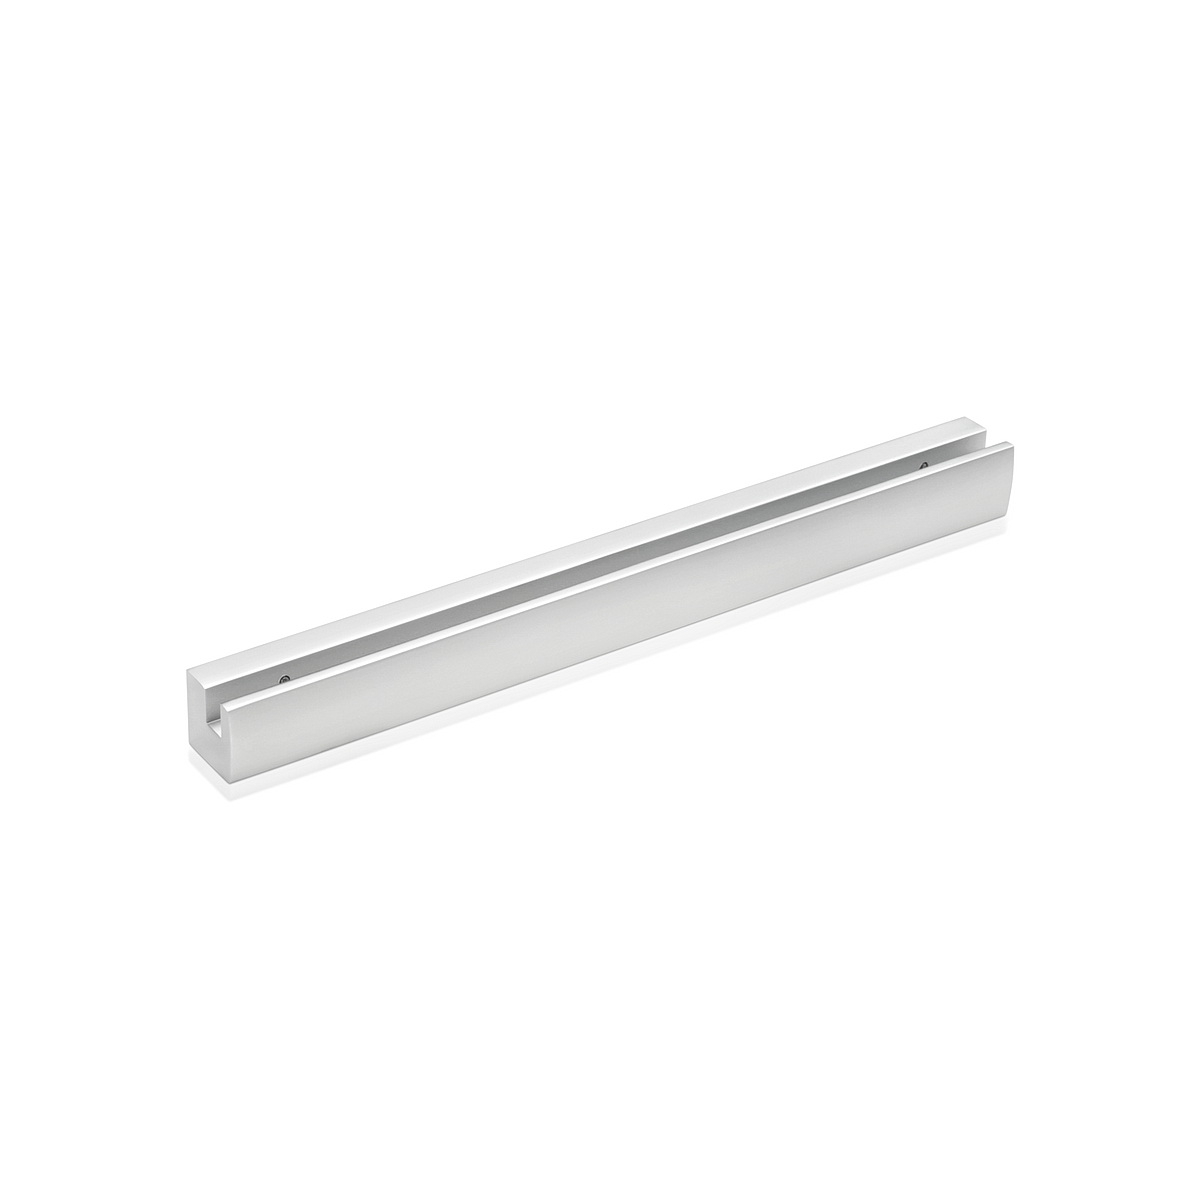 Sign Clamp in 11'' (280 mm) length  X 1'' (25.4 mm) wide - Satin